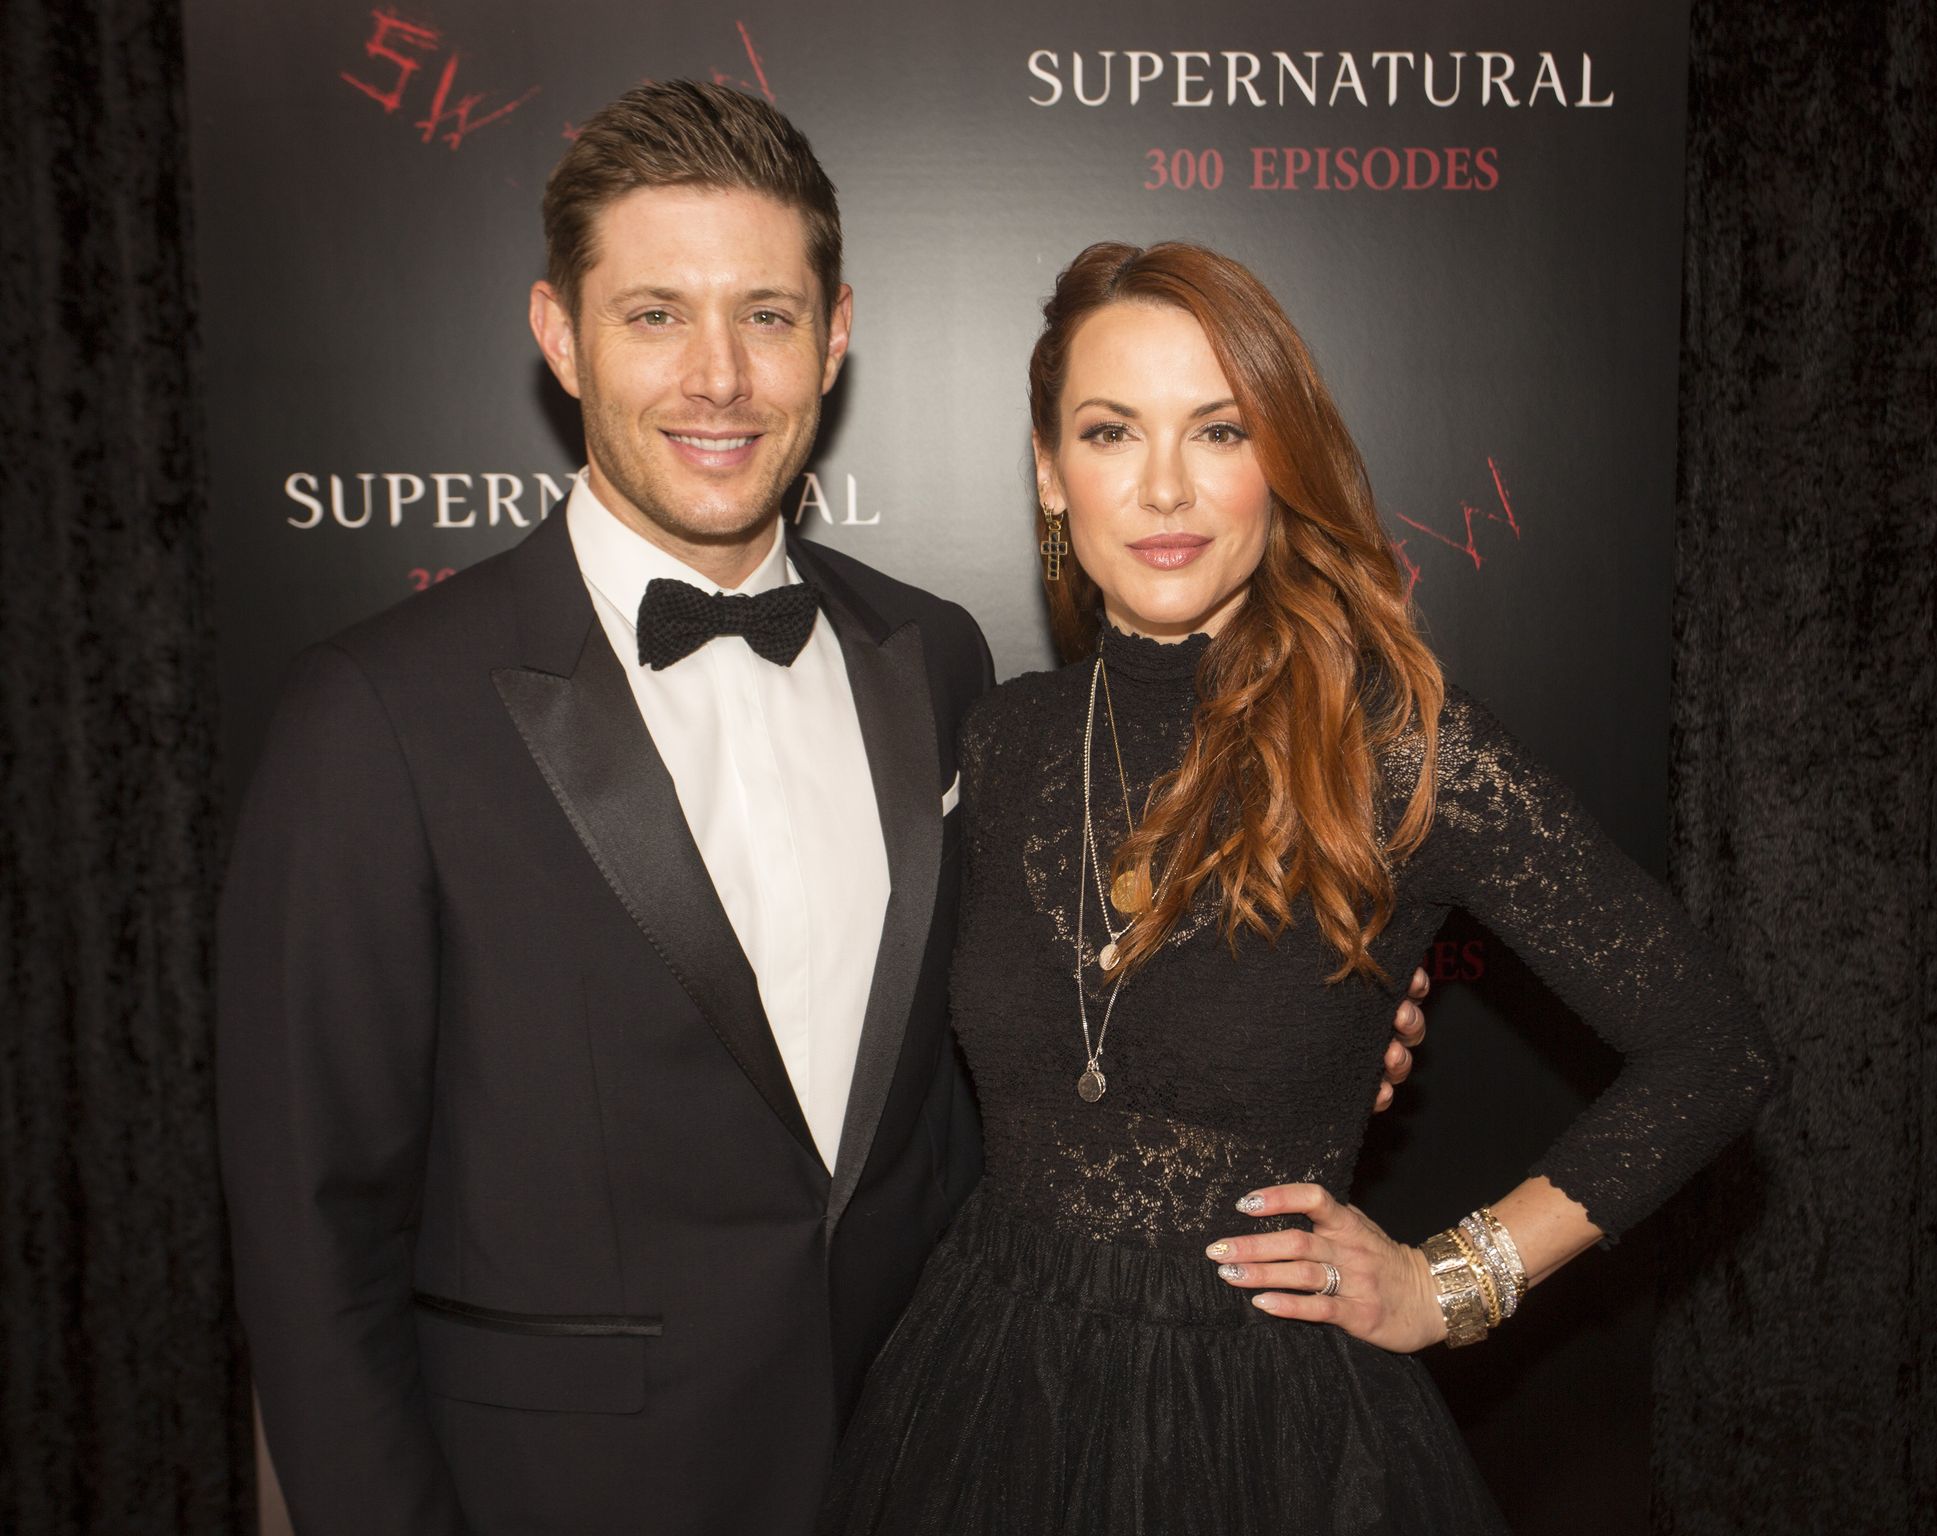 Jensen Ackles Brings Daughter Justice Jay To 'Zombies 3′ Premiere, Jensen  Ackles, Justice Jay Ackles